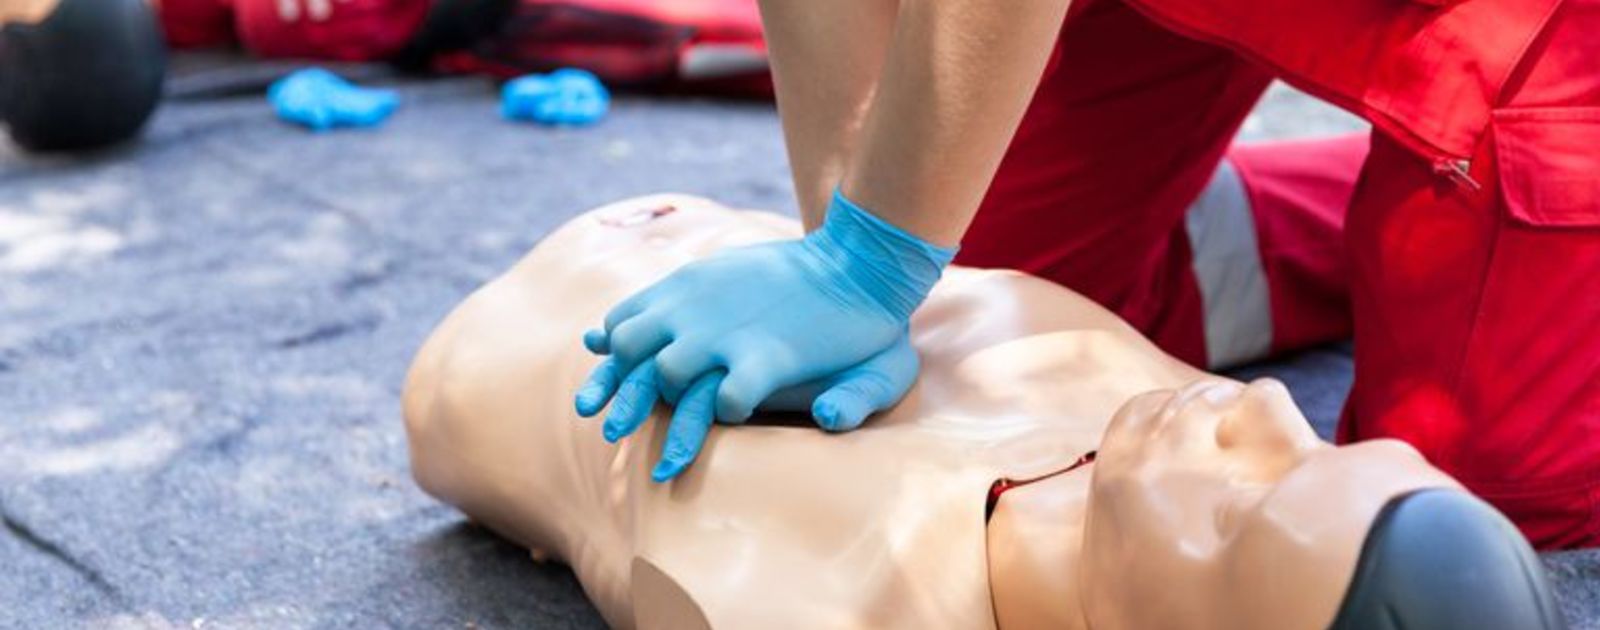 Learn Hands-Only CPR on October 25 - News - Office of the Executive ...